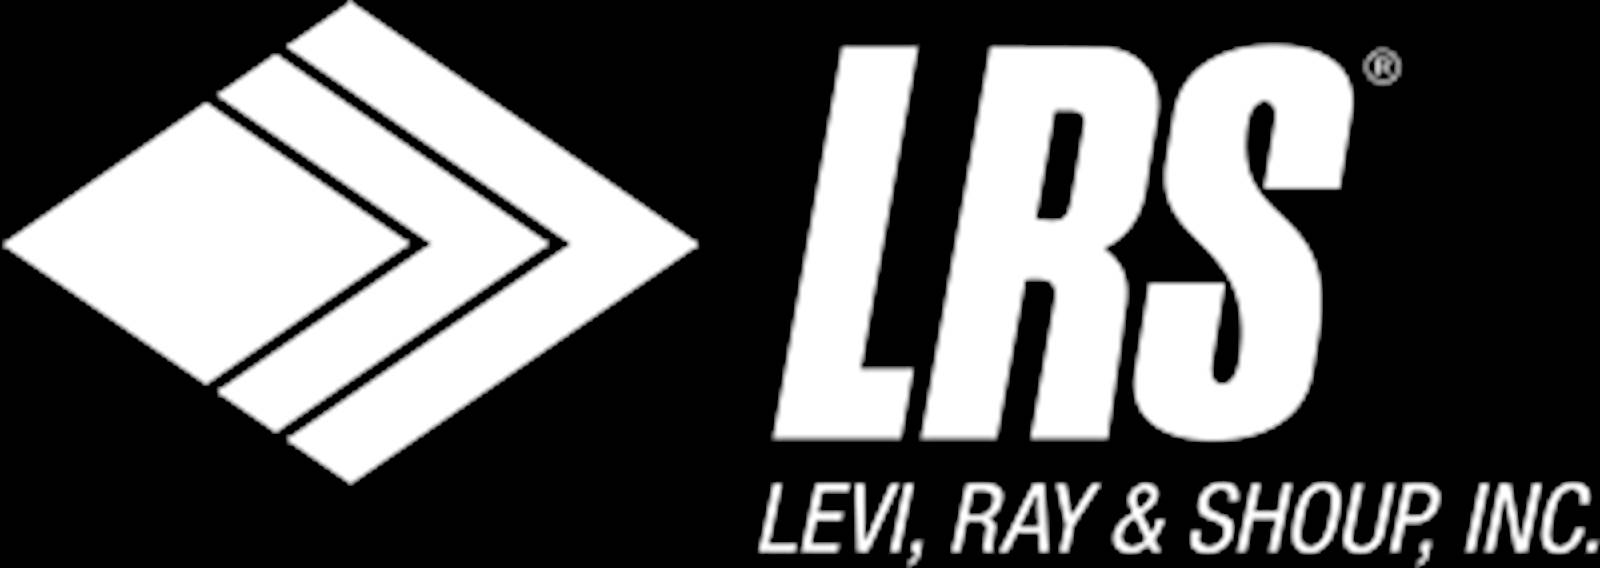 LRS: Levi, Ray & Shoup Inc. in black and white